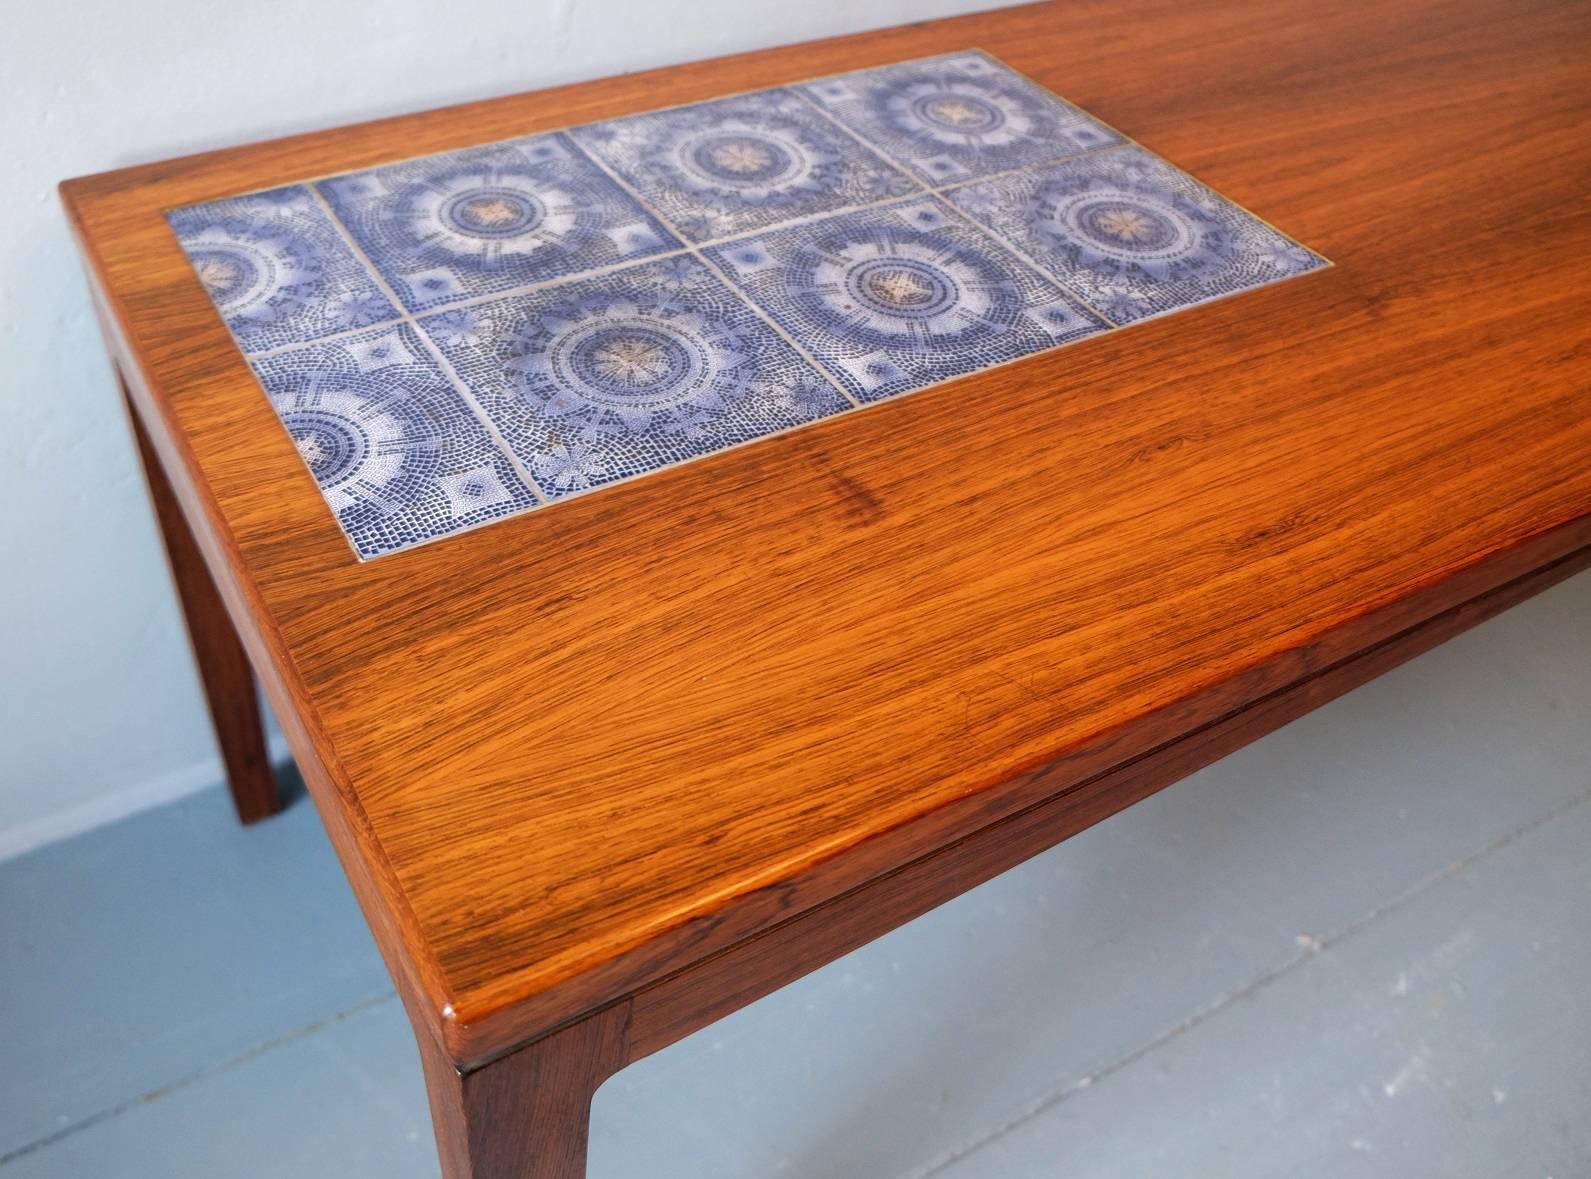 Mid-20th Century Unusual Danish Rosewood Coffee Table with Fine Mosaic Tiled Panel, 1960s For Sale